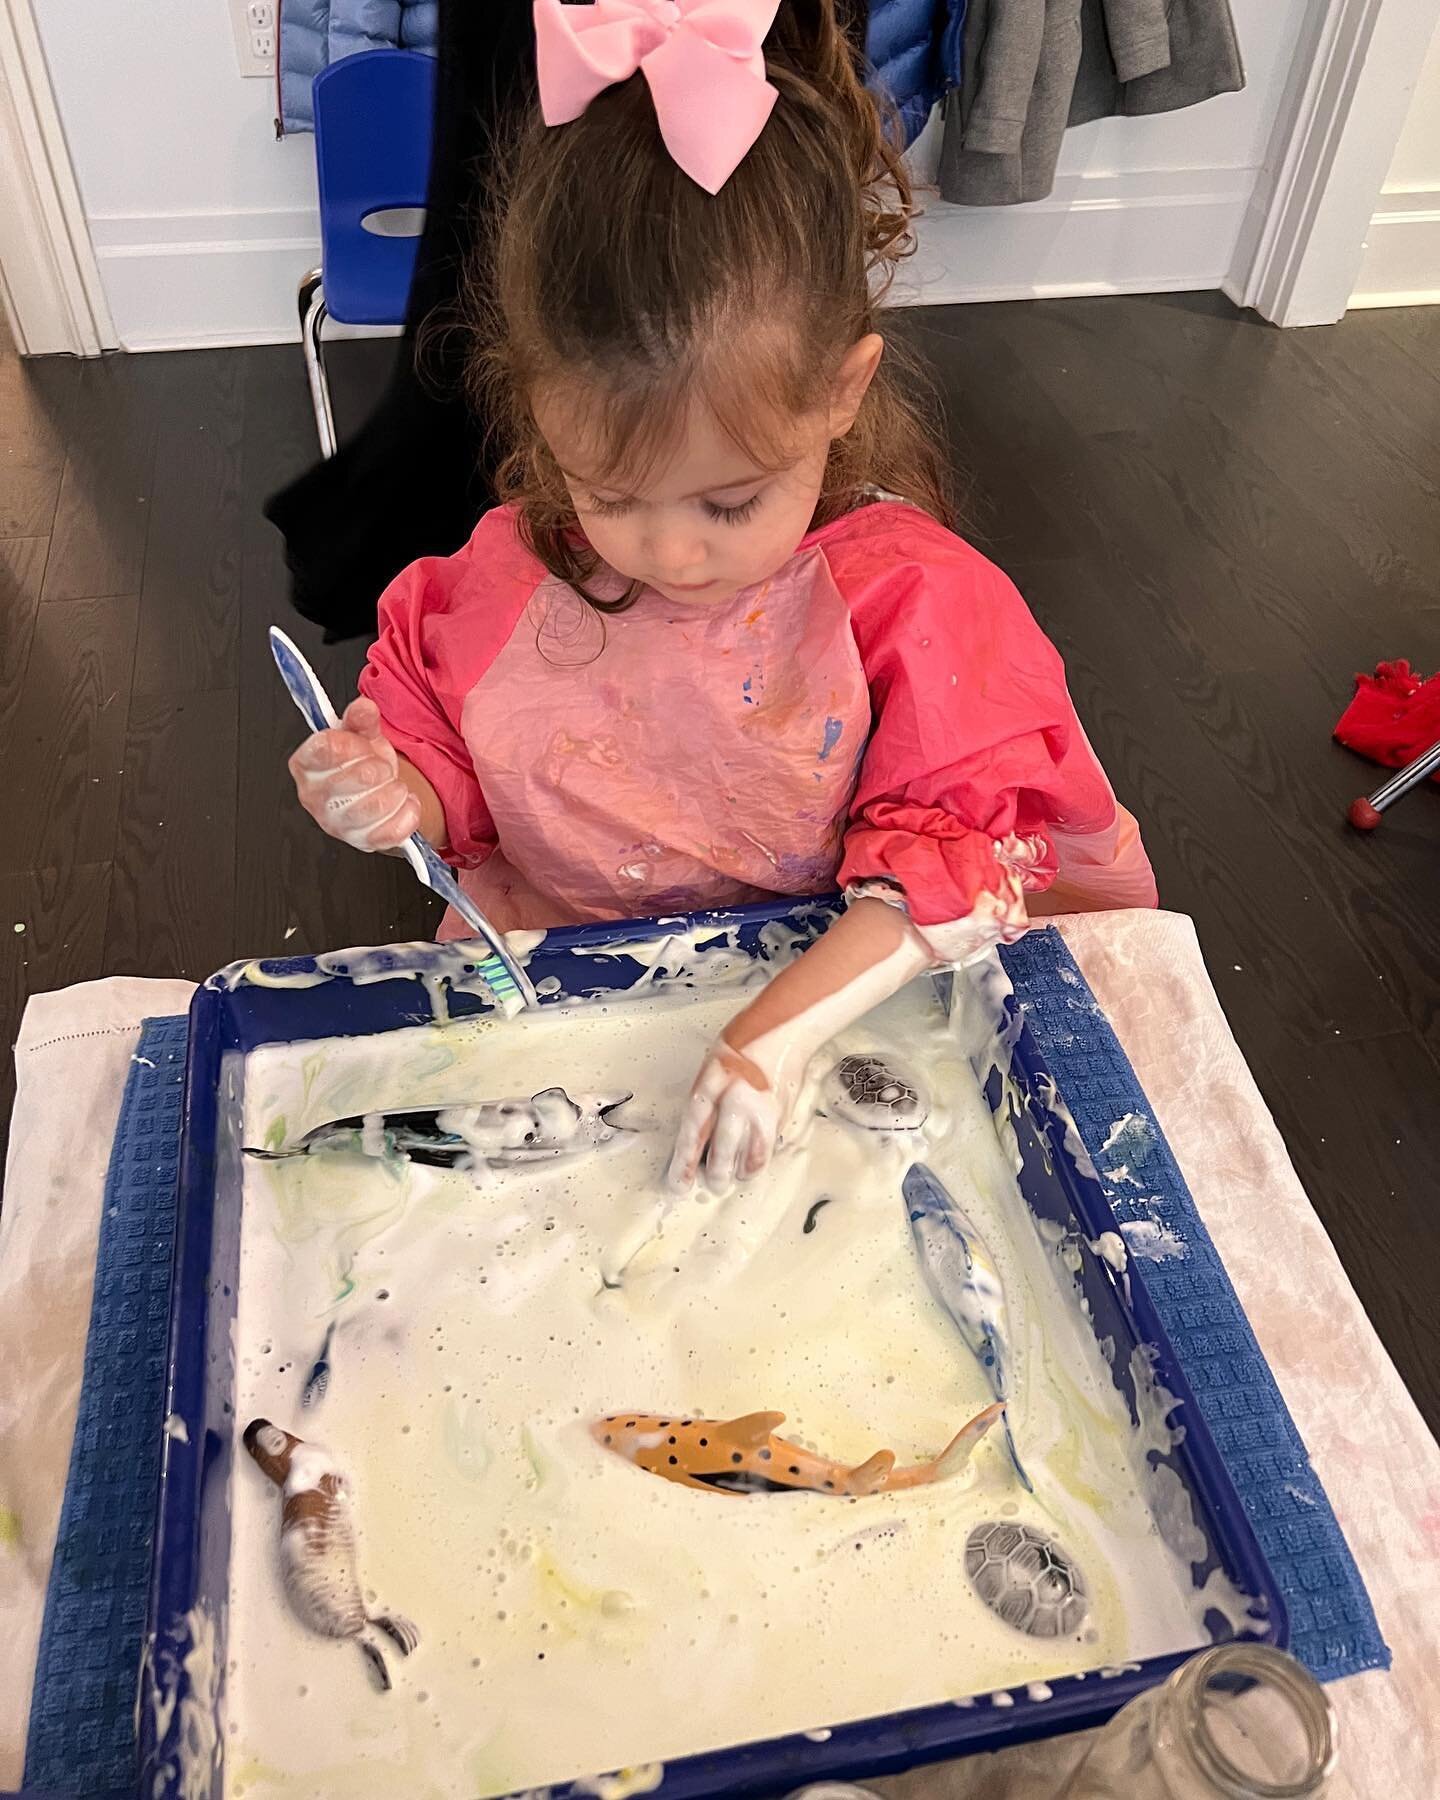 Sensory play with shaving cream, water, and sand!